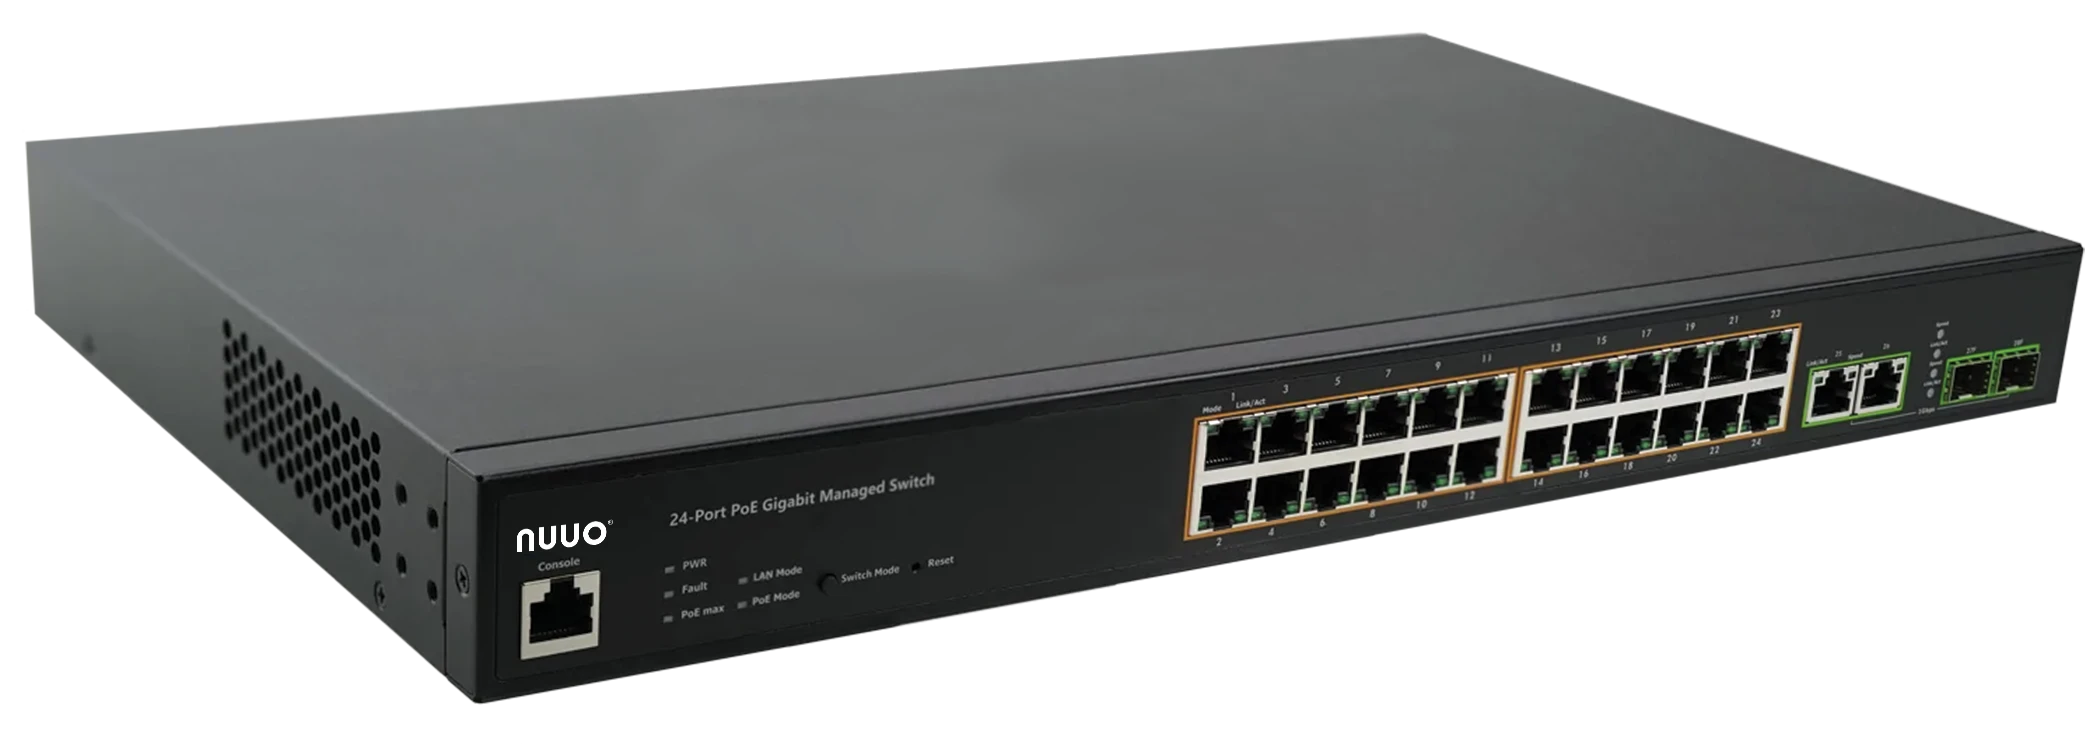 2225-n24poe-switch-product-image-front-tilt-1688077481121.png